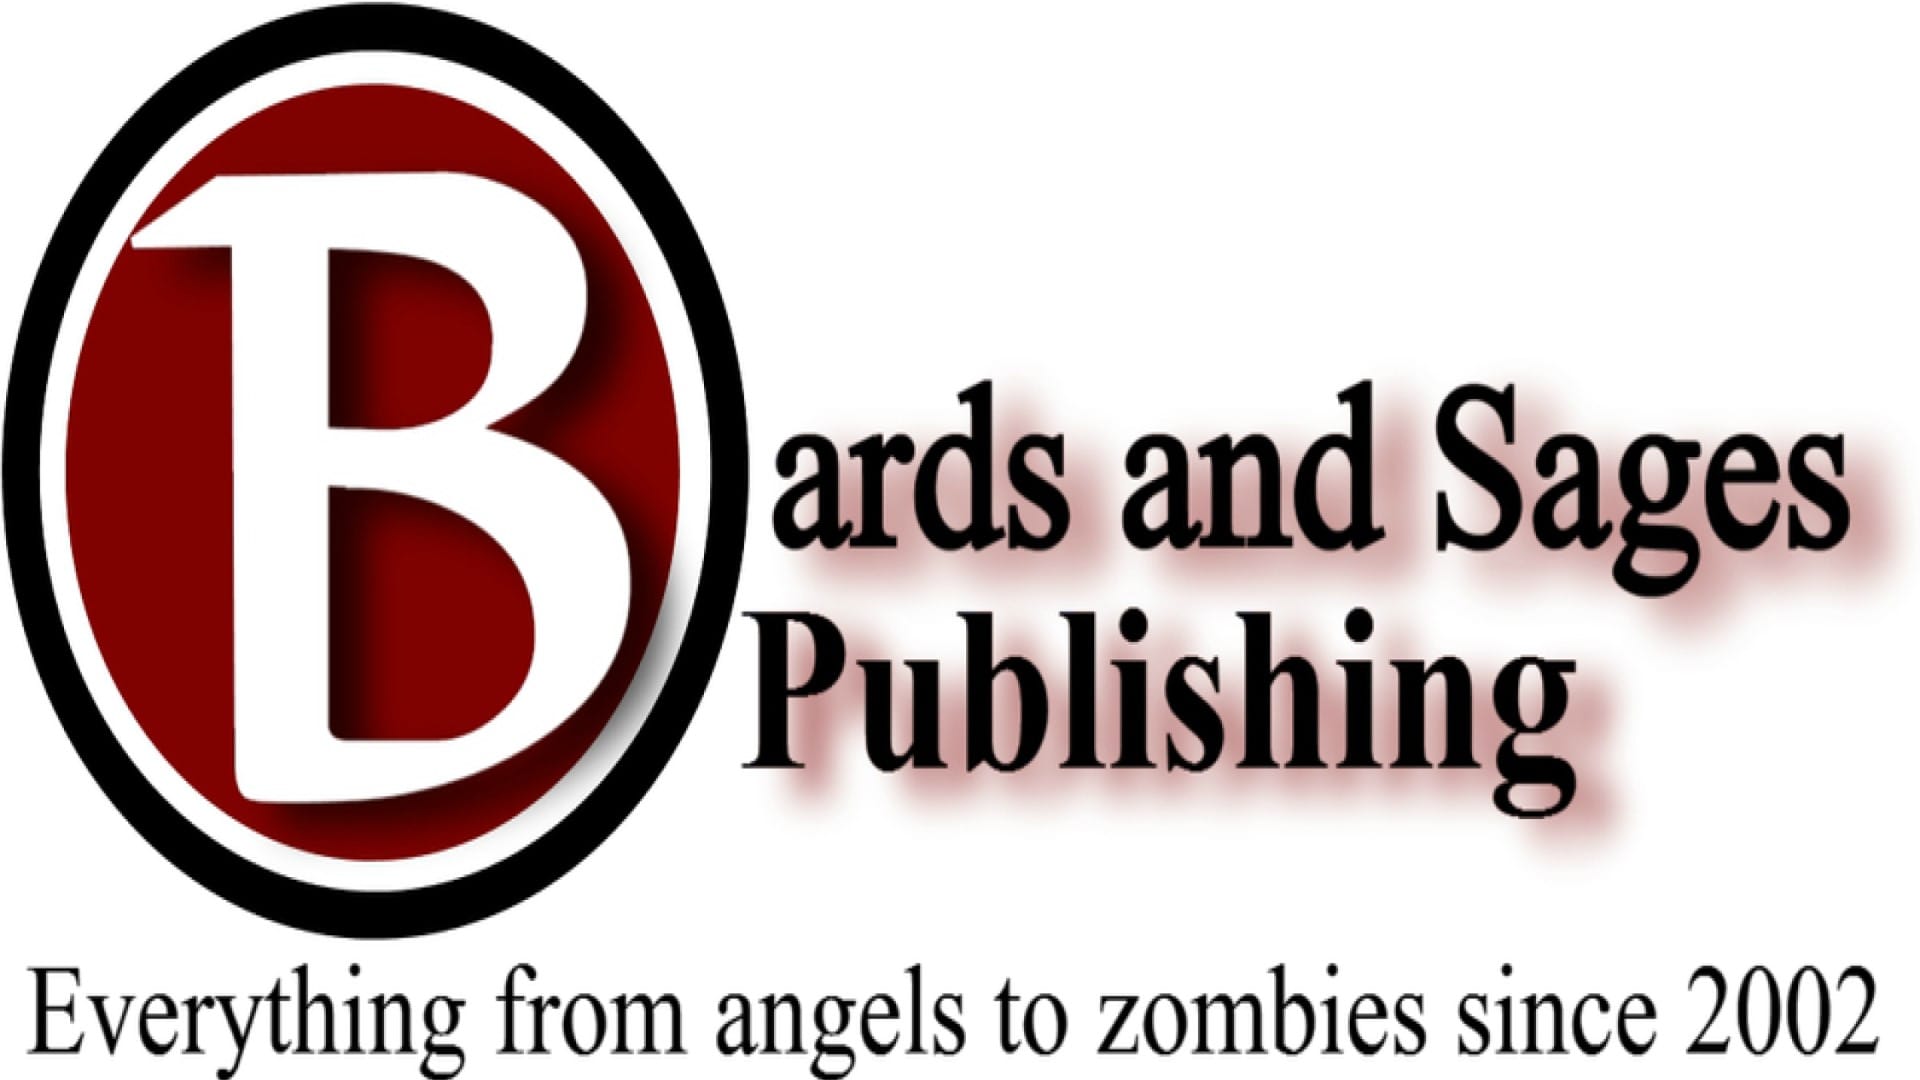 The logo for Bards and Sages Publishing on a white background.